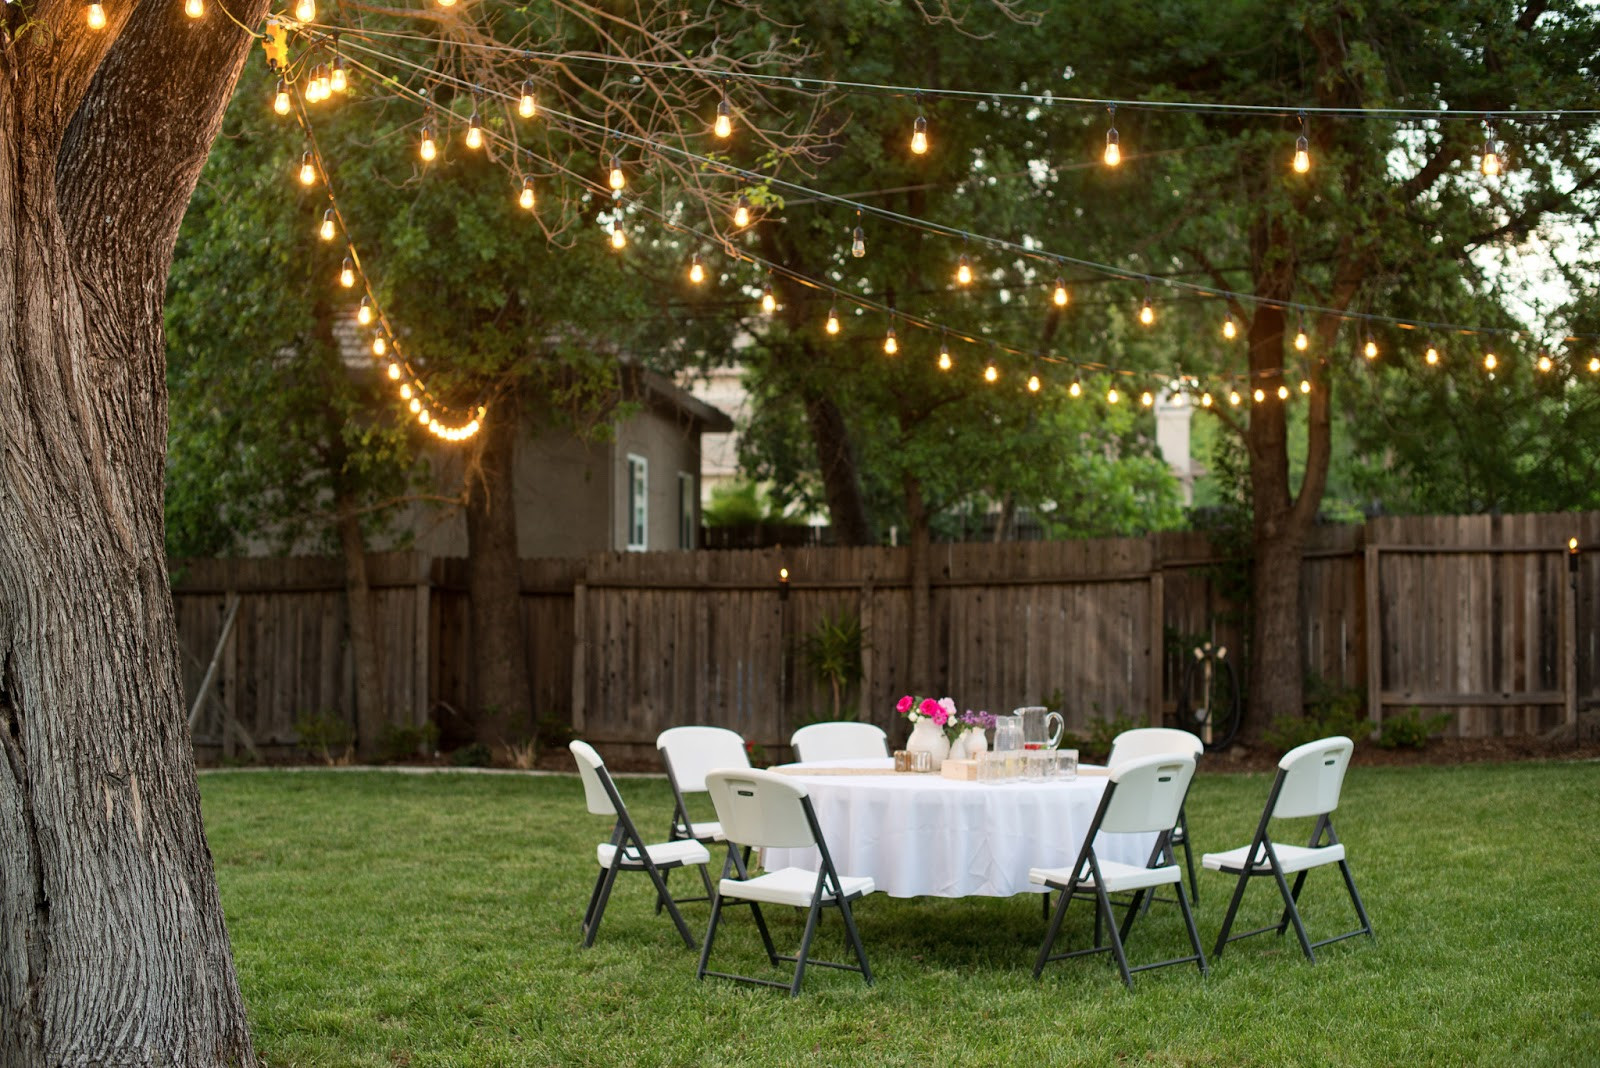 The Best Ideas for Backyard Party Ideas for Adults - Home, Family ...